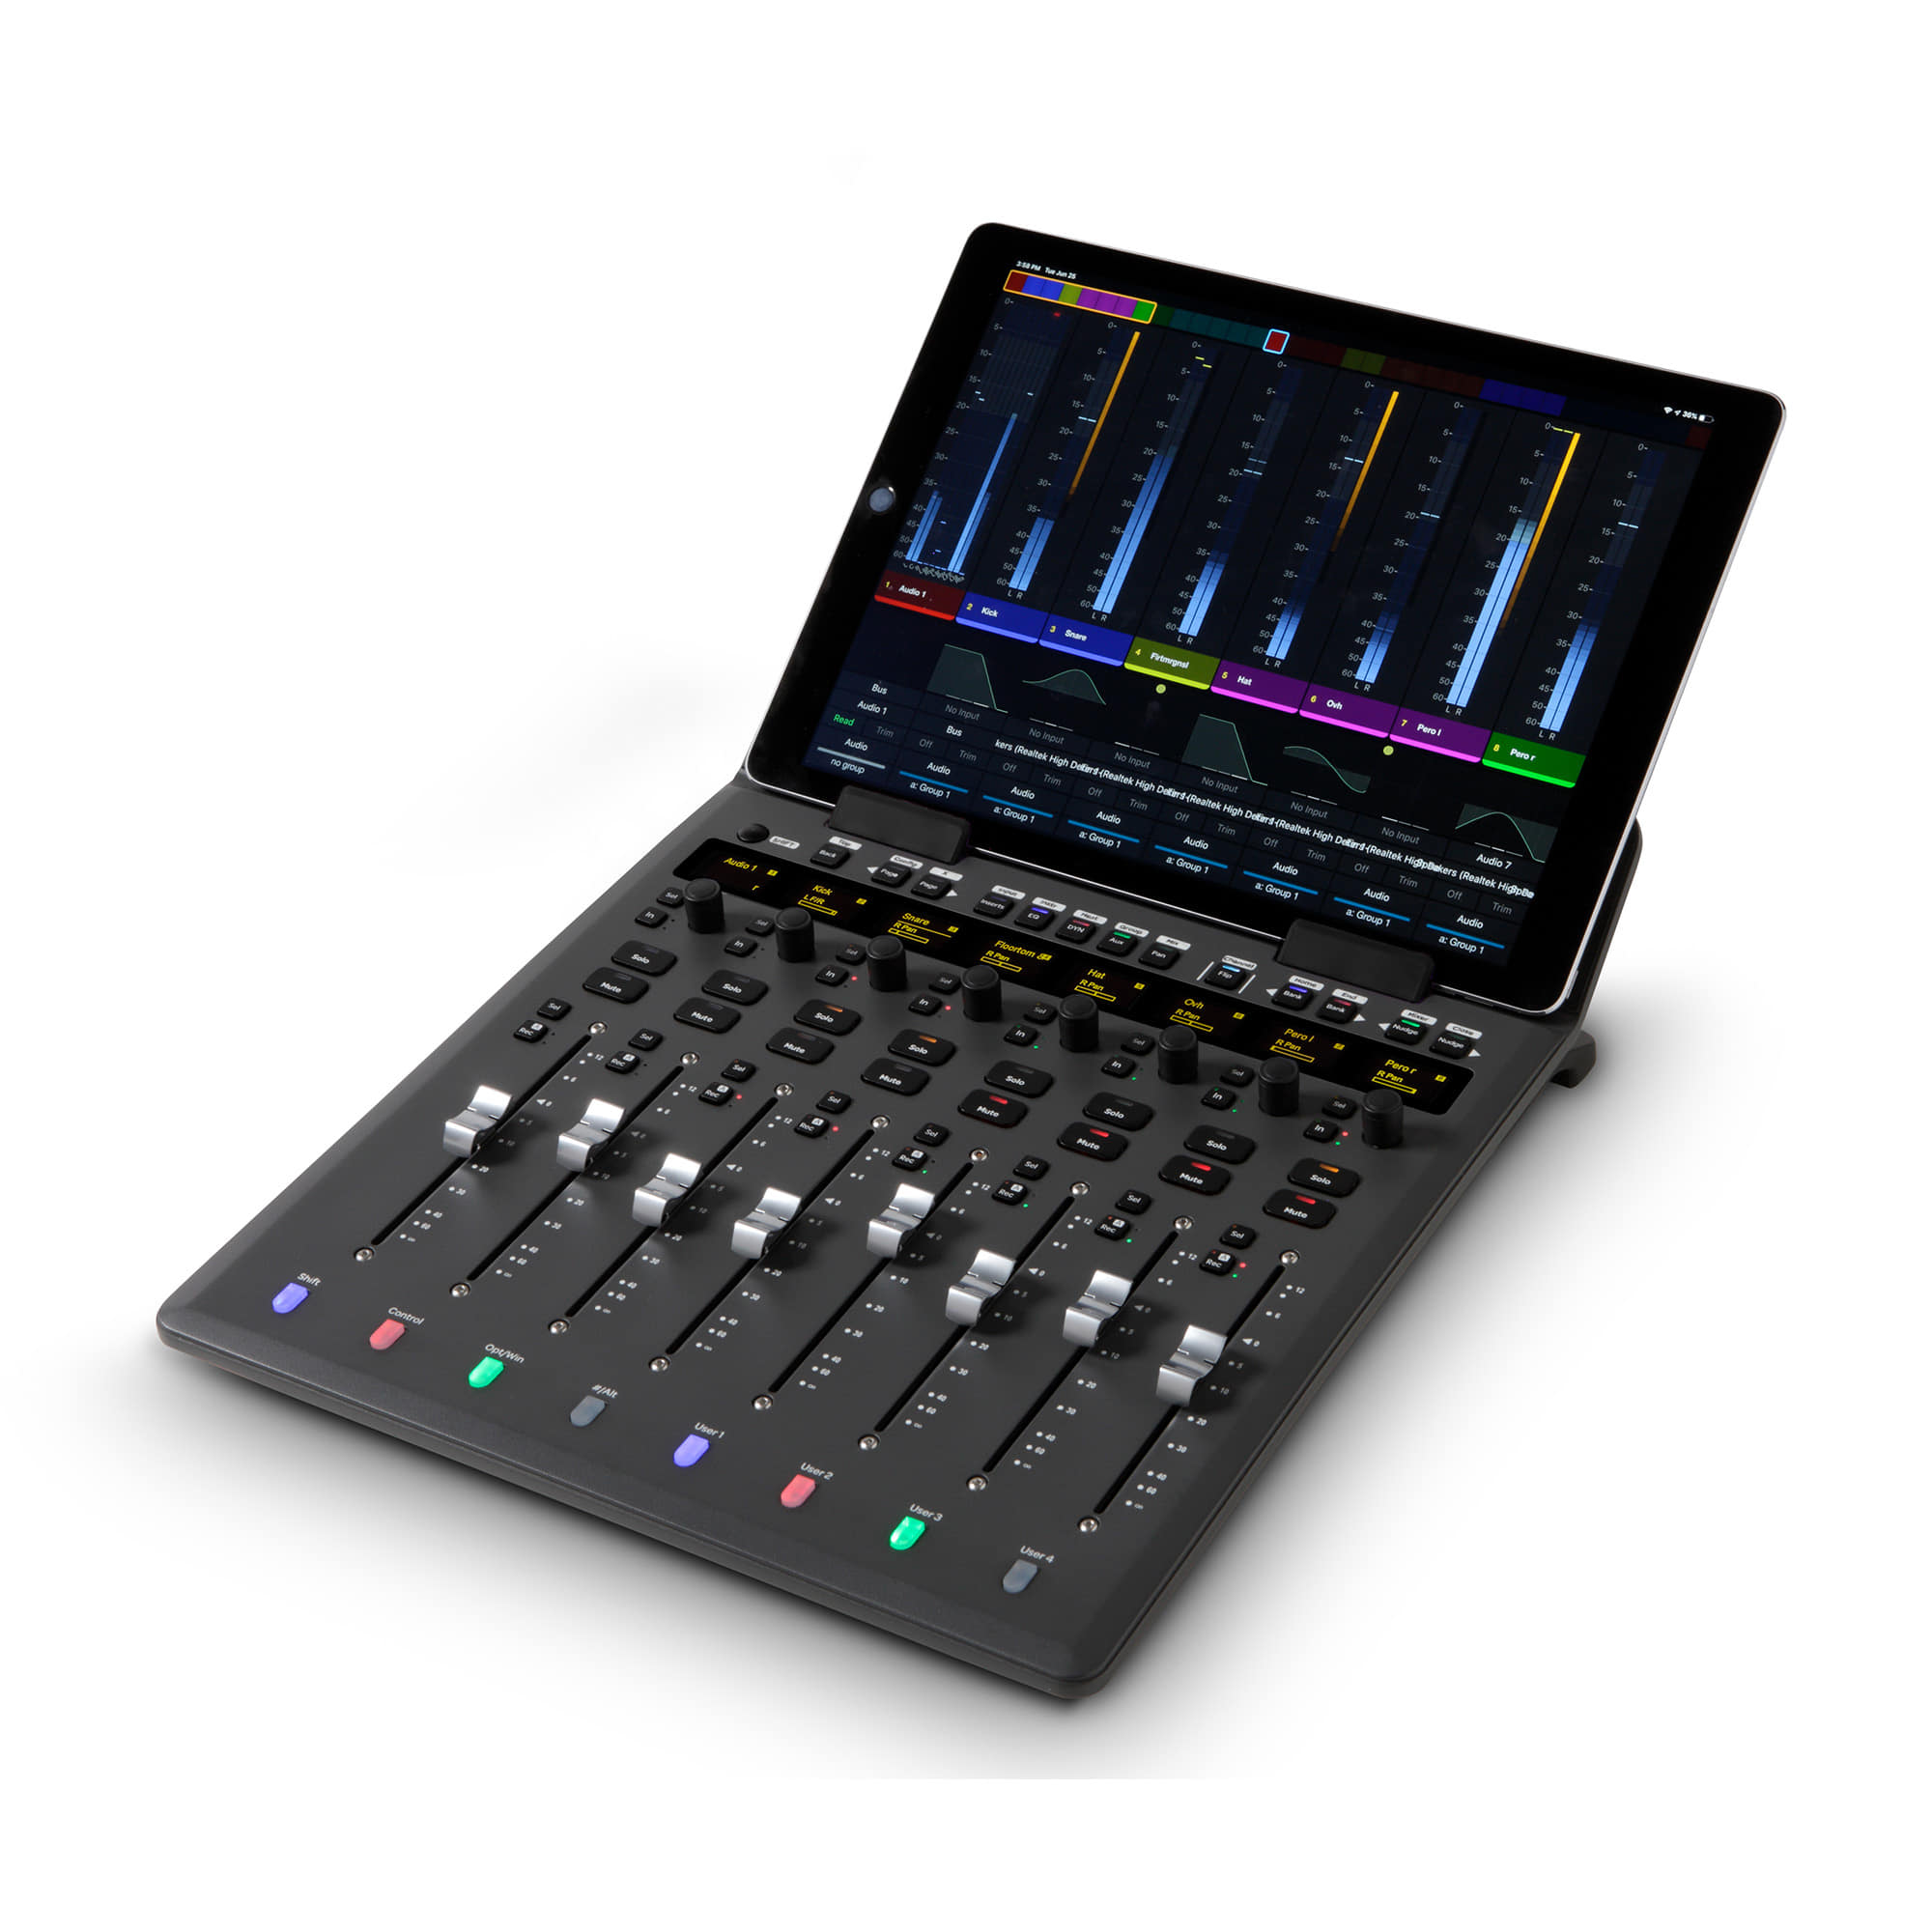 Avid S1 control surface